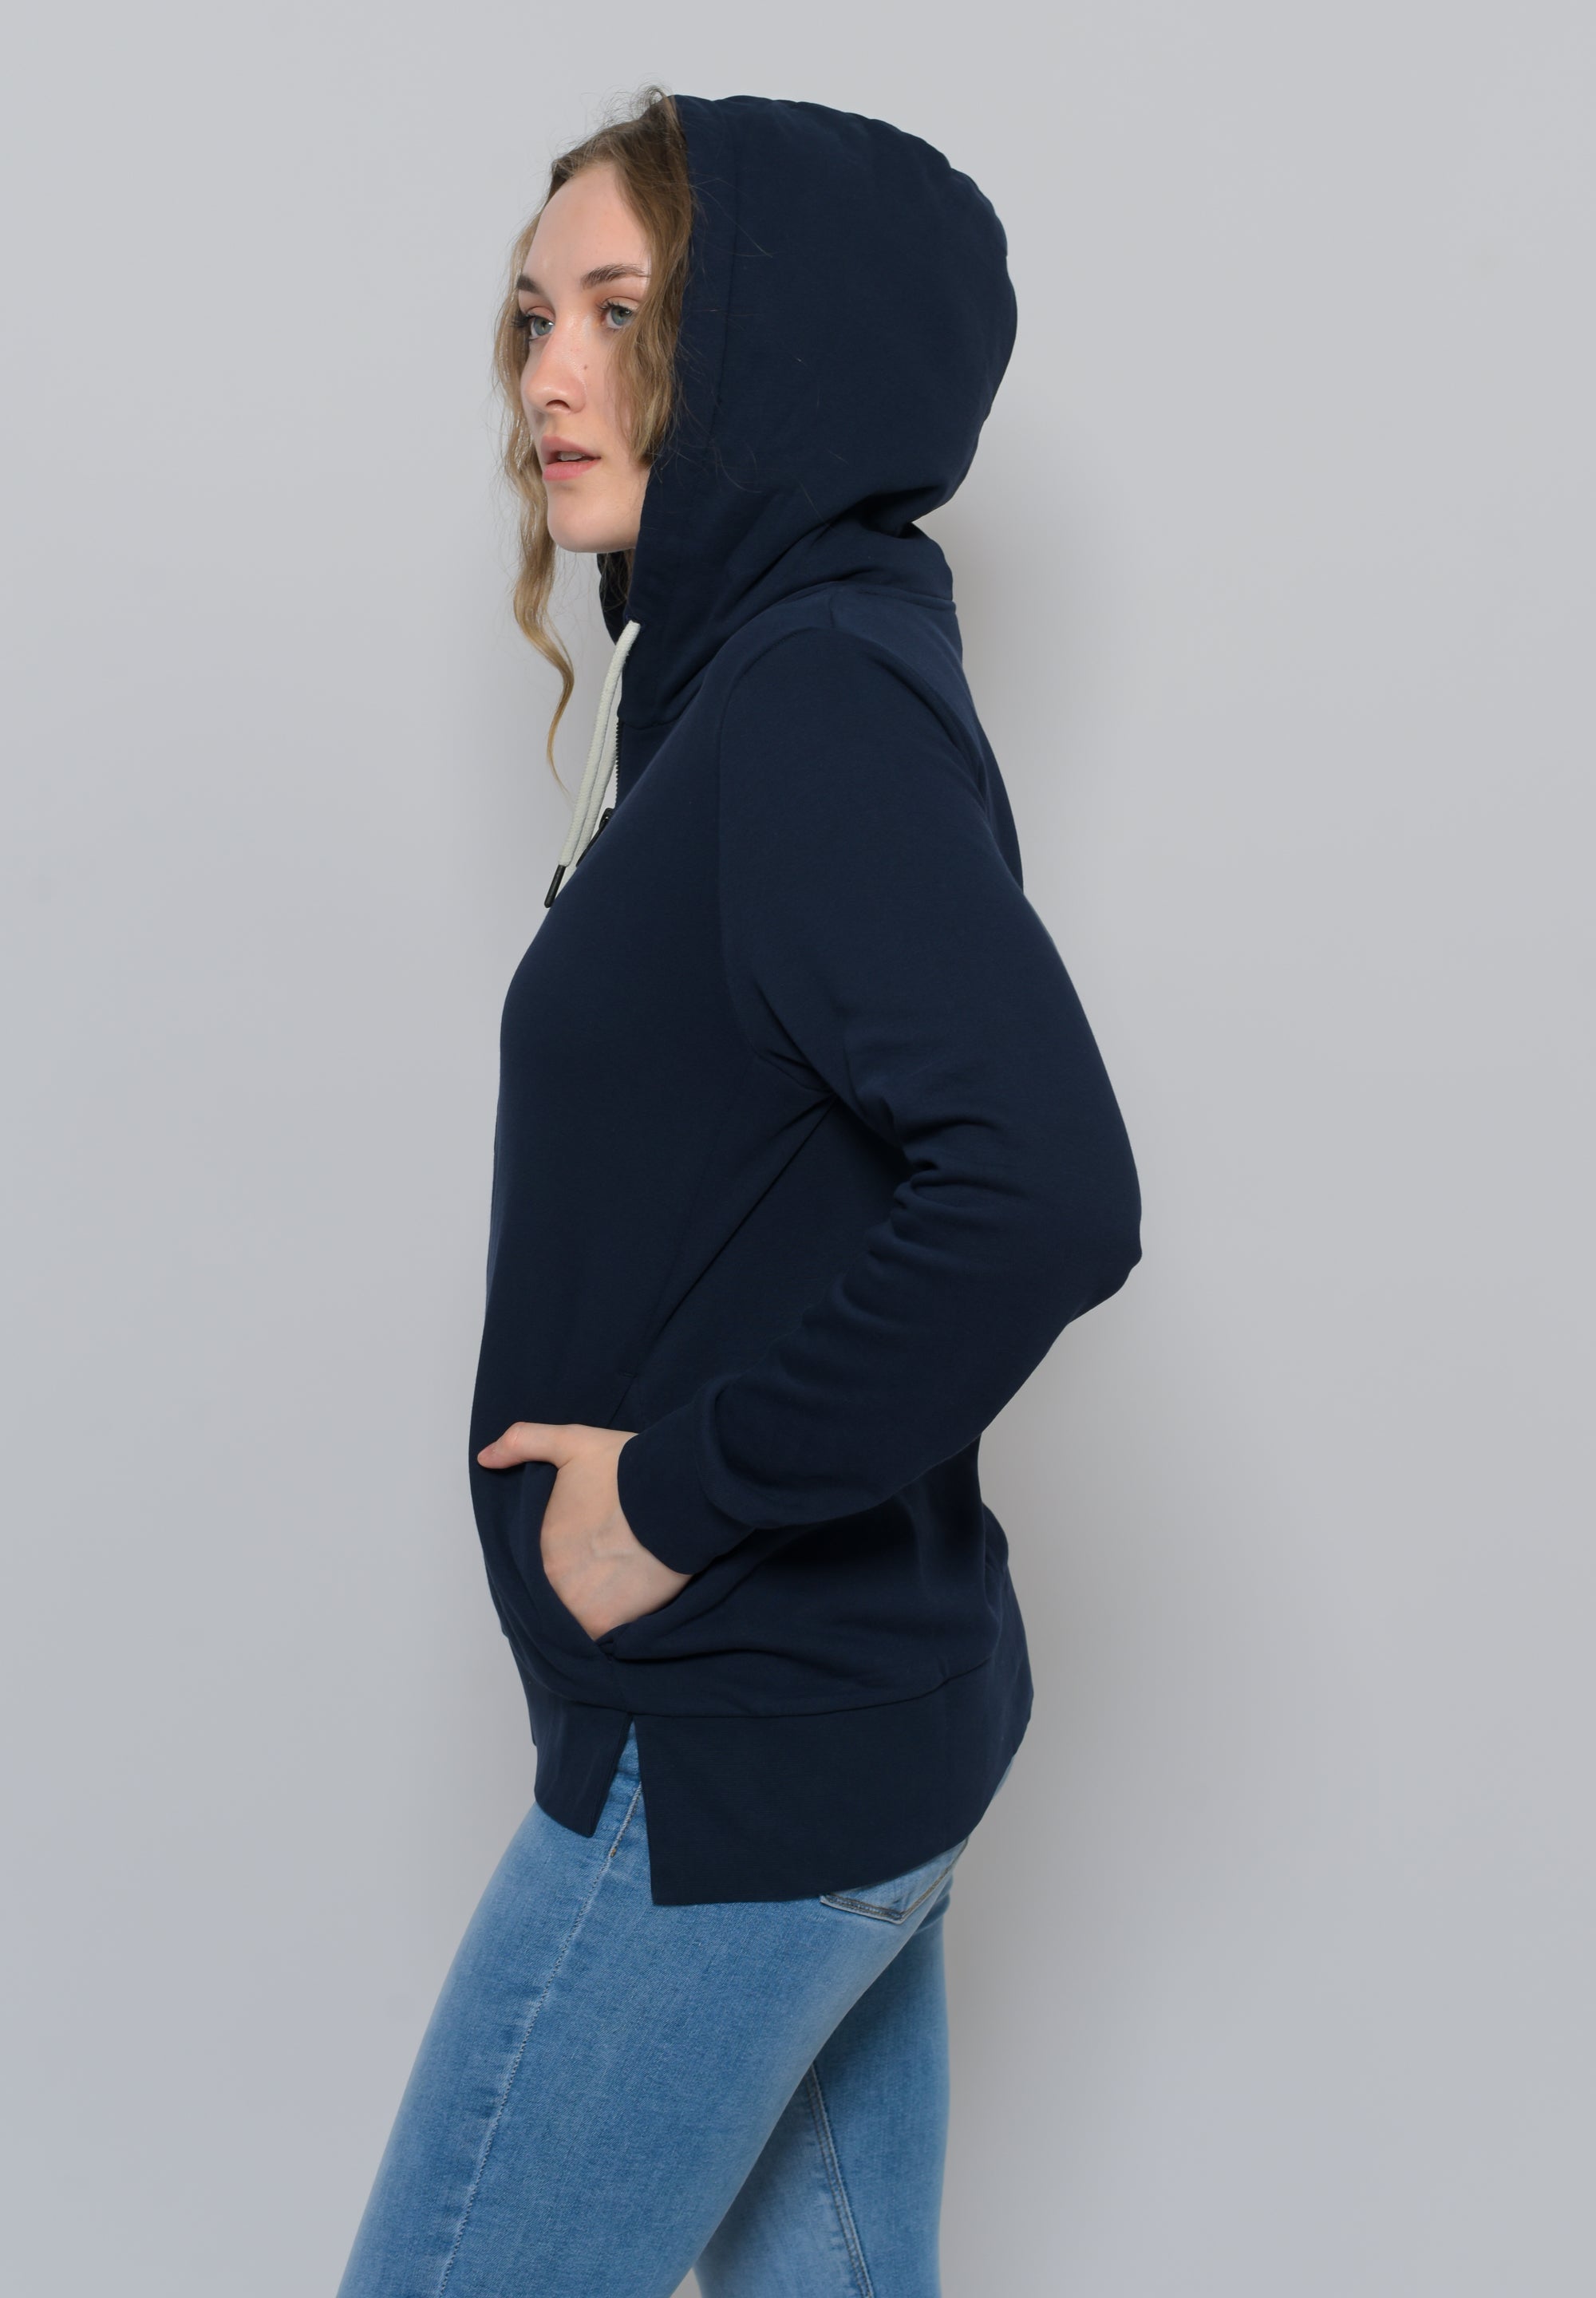 SOMWR EMPHASIS Zip-Hoodie NVY012